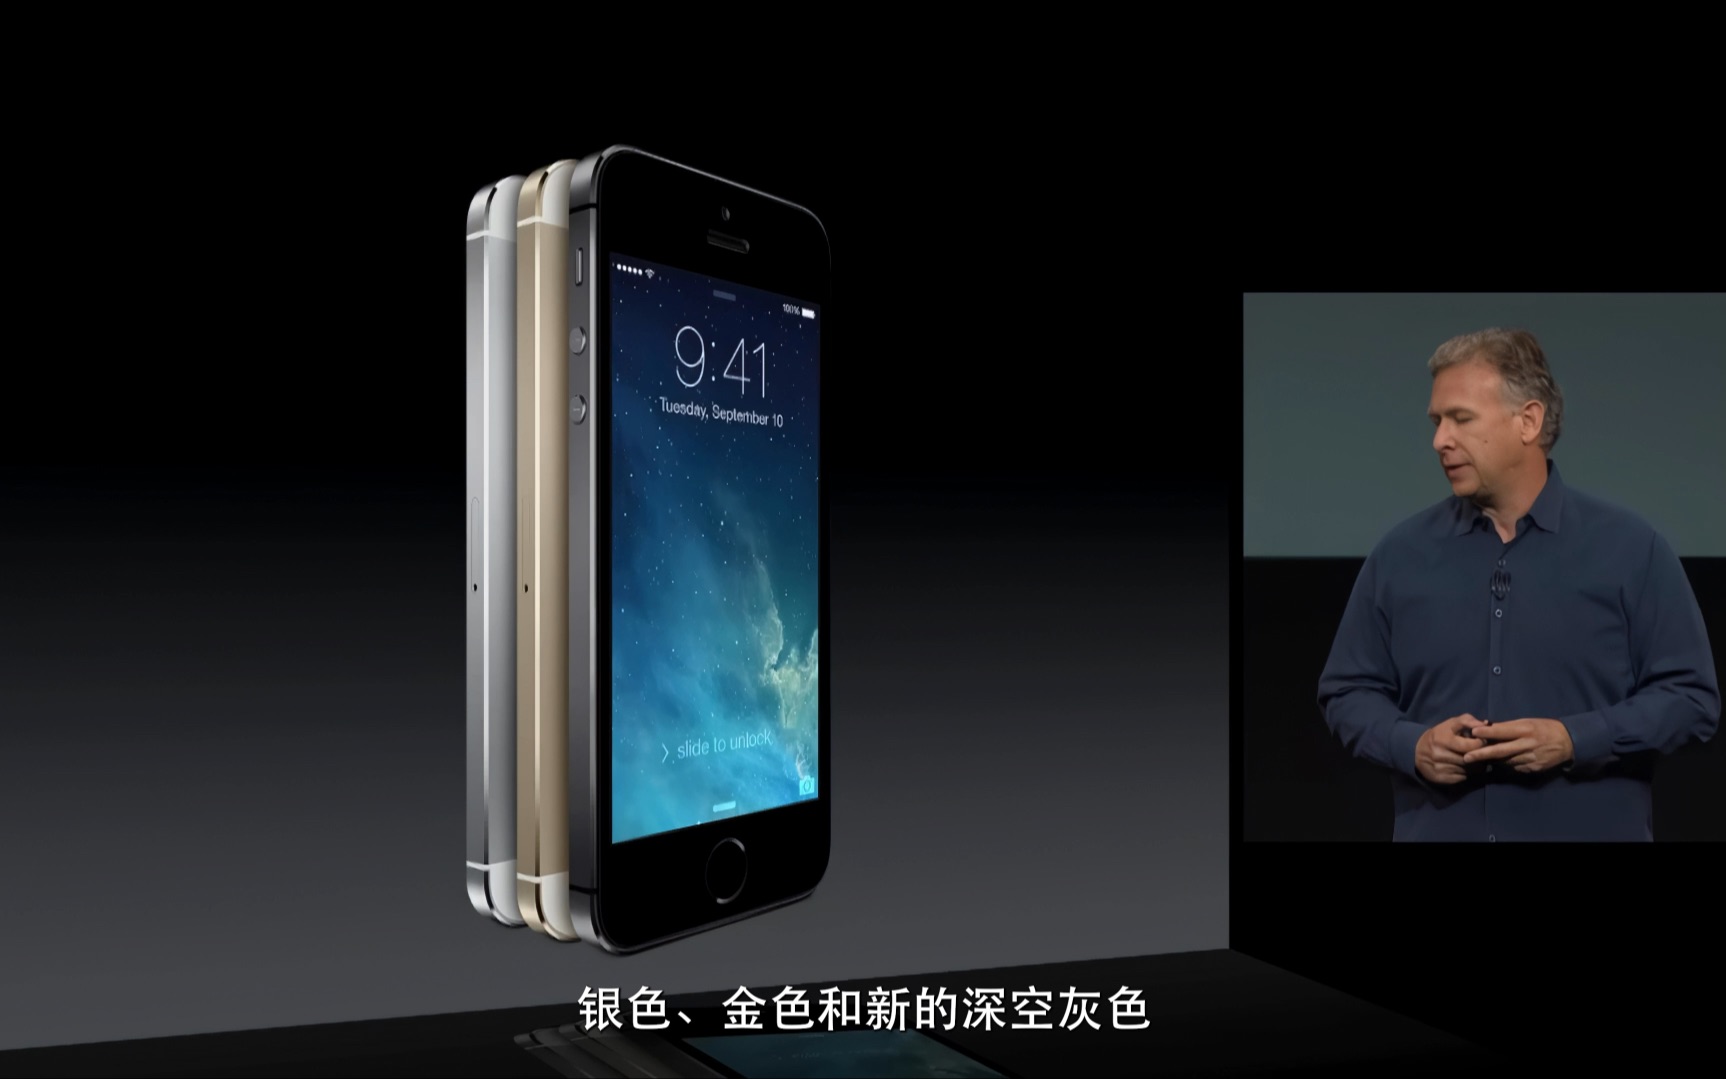 【4K重制 中文字幕】苹果2013发布会iPhone5S部分 Apple Special Event September 10, 2013